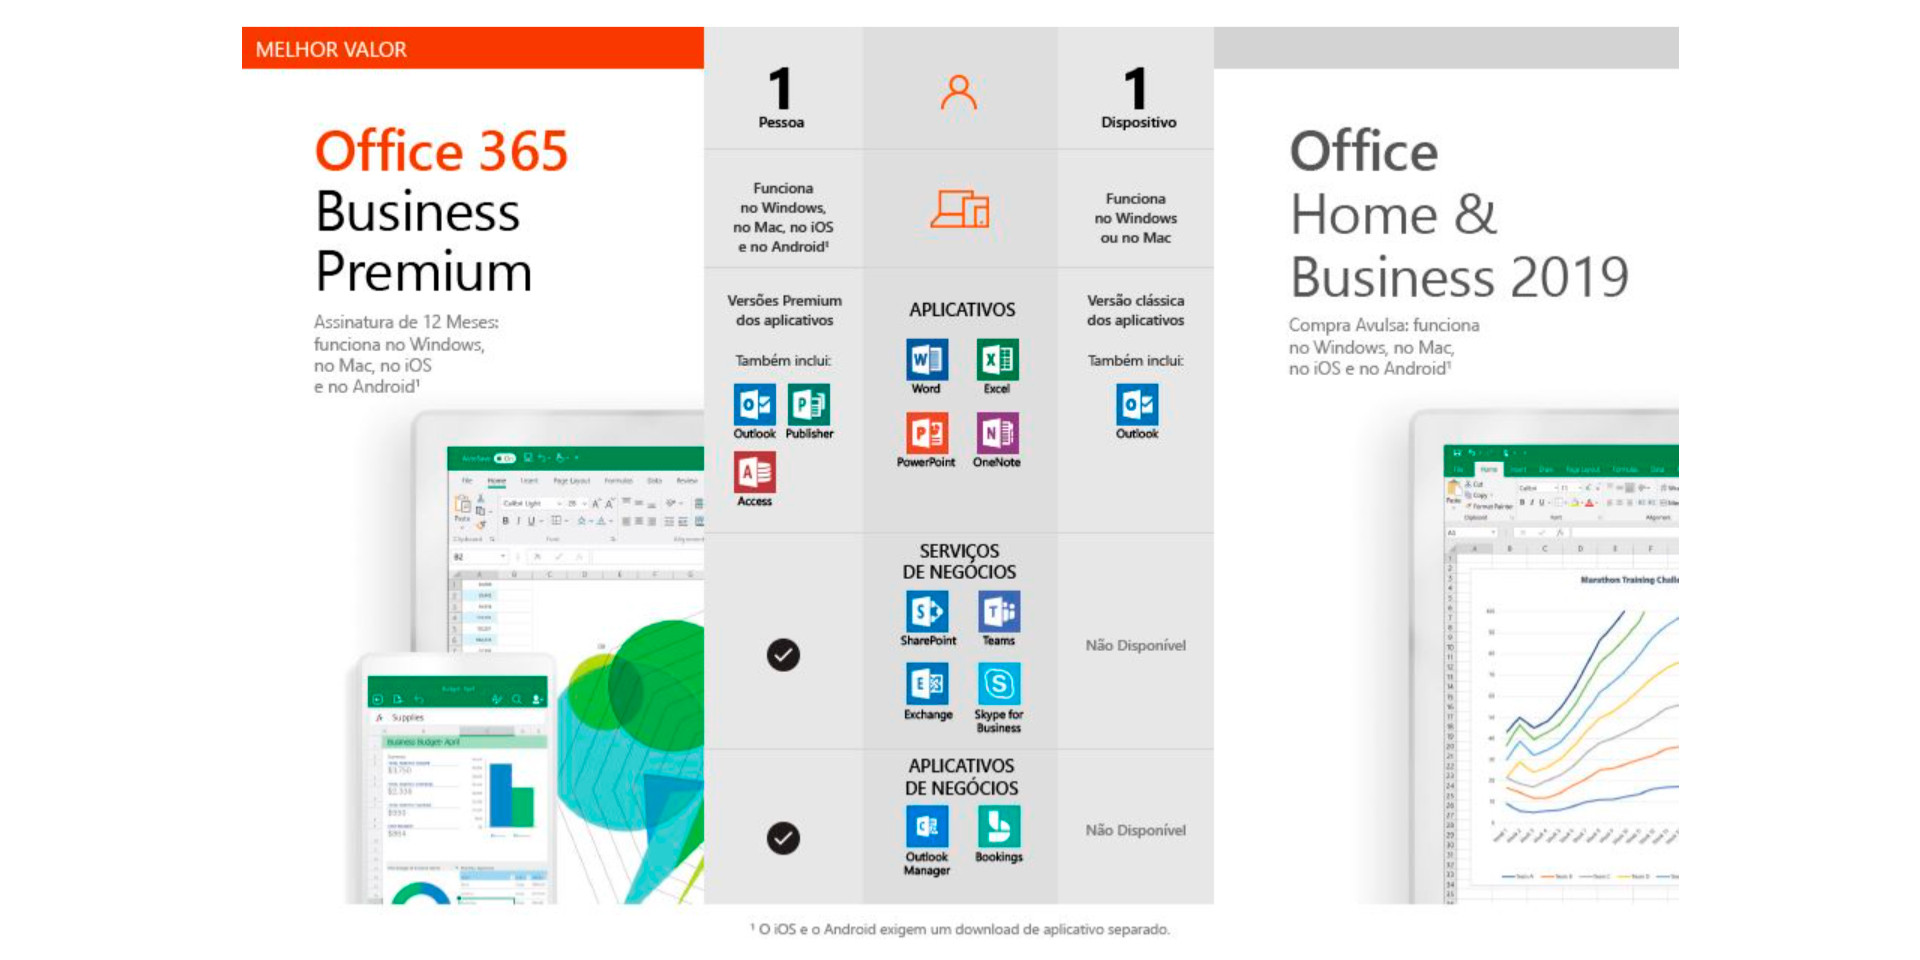 microsoft office 2019 home and business mac